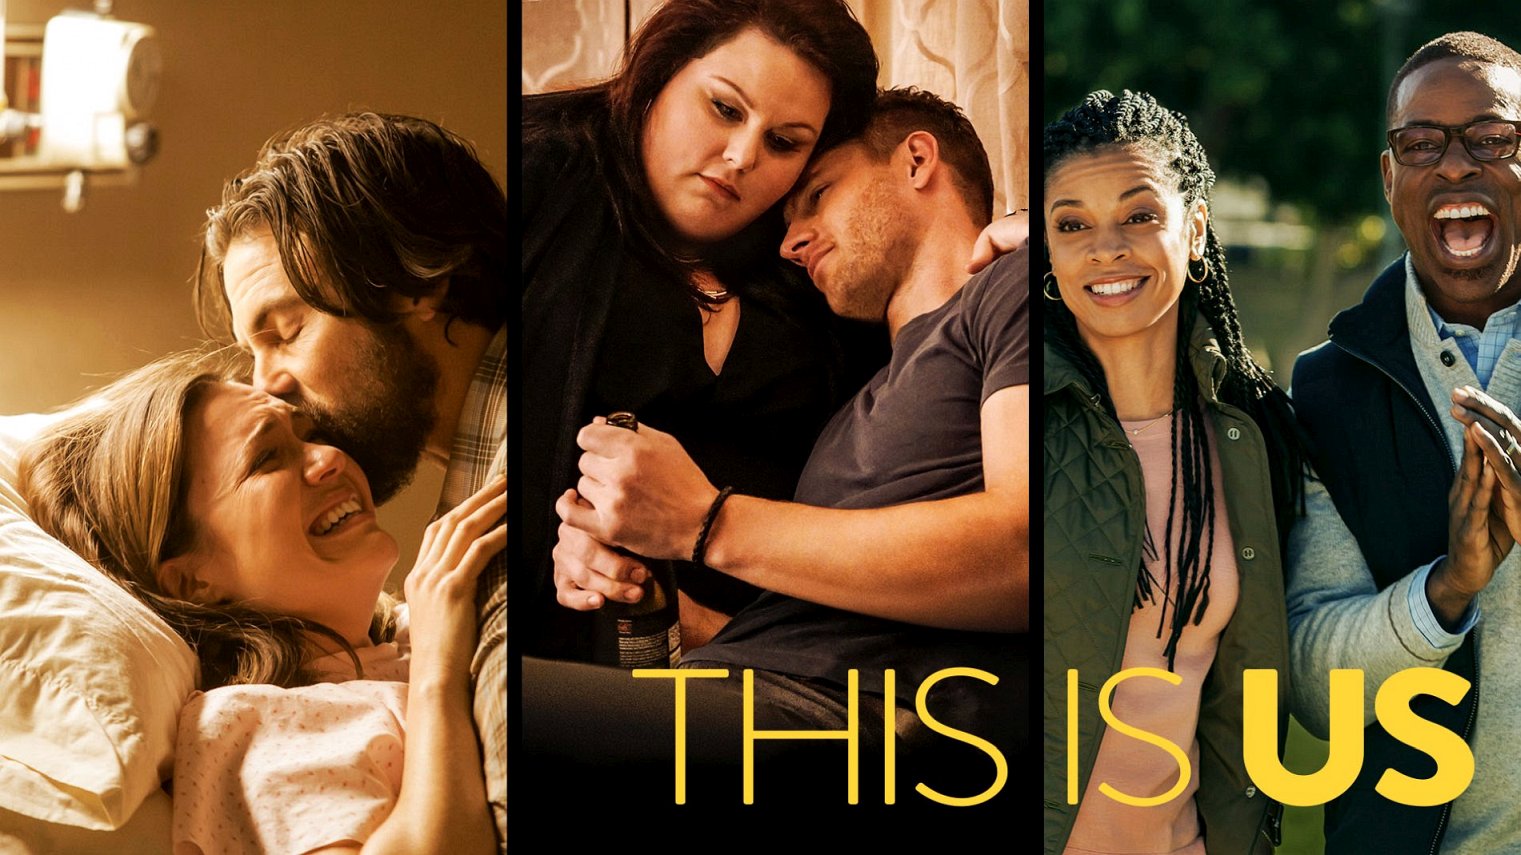 cast of This Is Us season 1